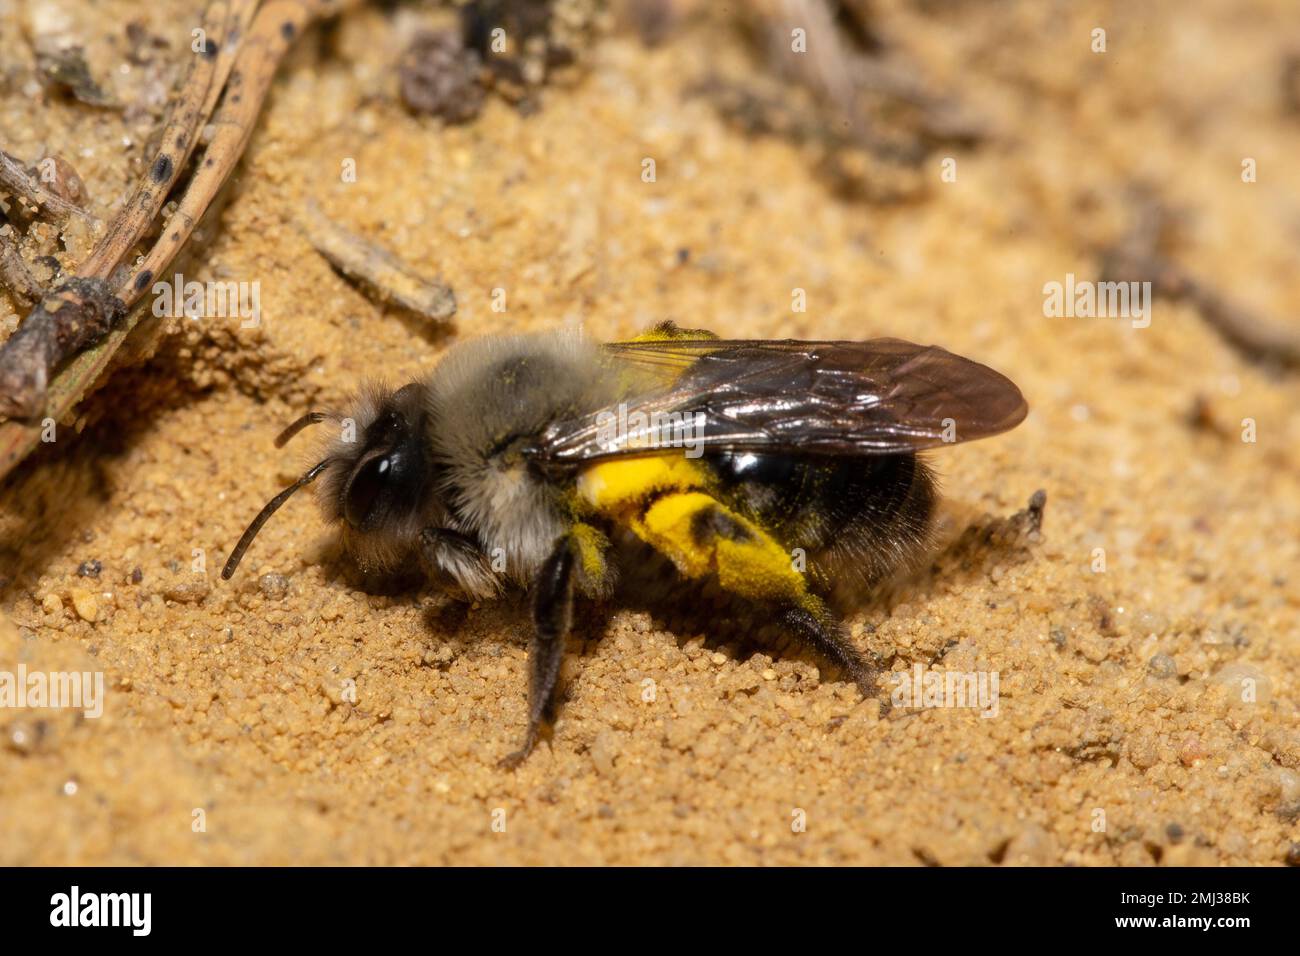 Willow sand bee with yellow pollen sitting on sand in front of brood hole left looking Stock Photo